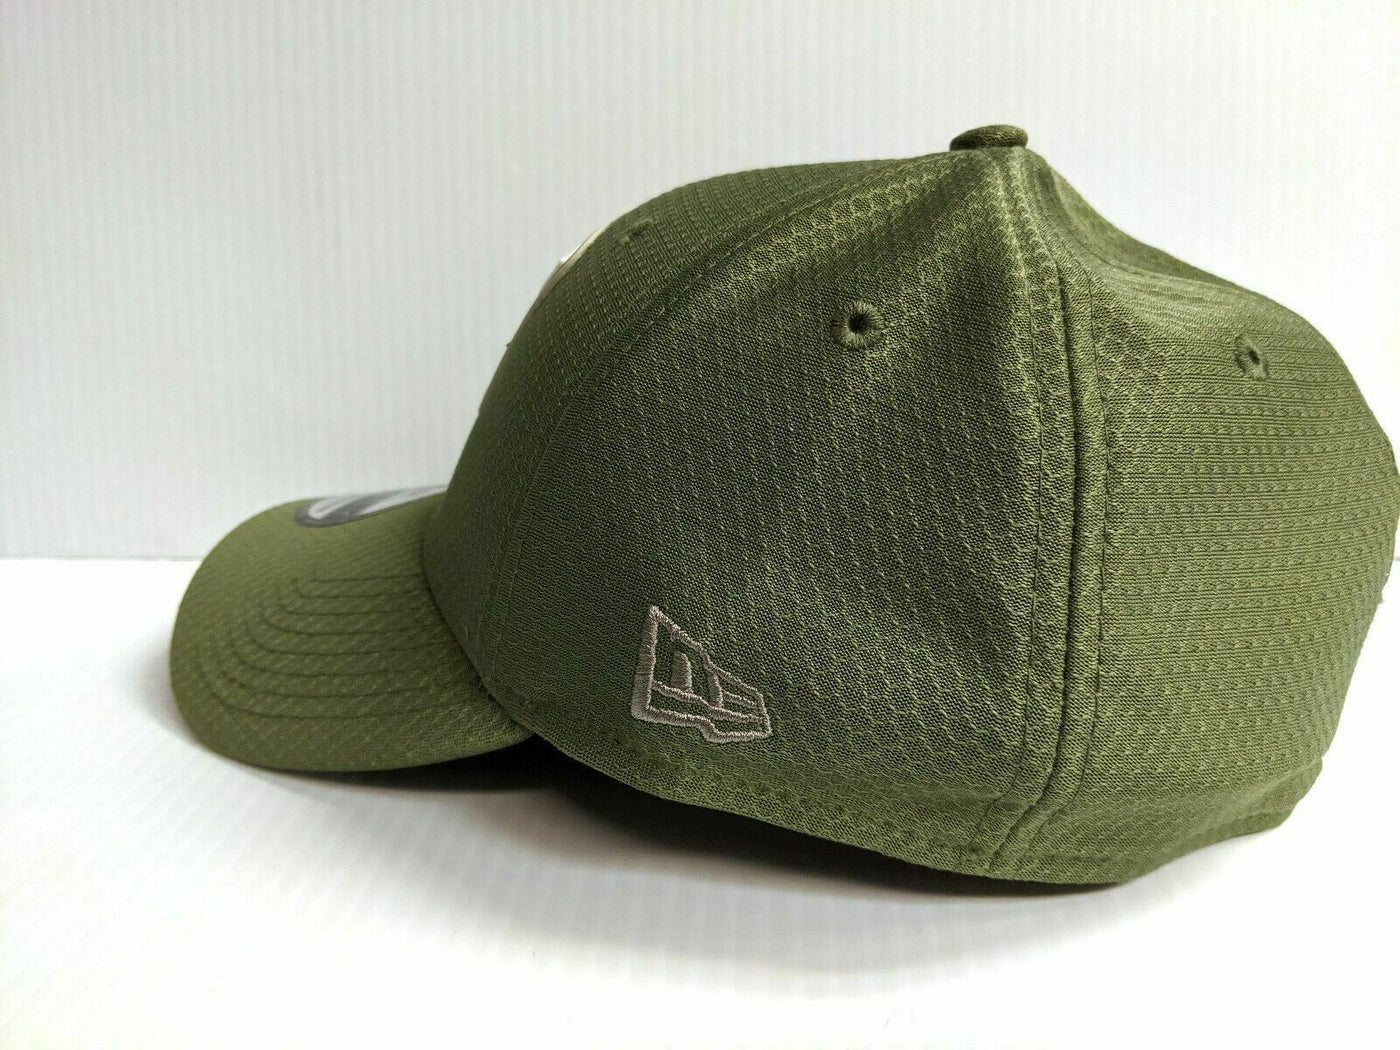 new york jets salute to service hat